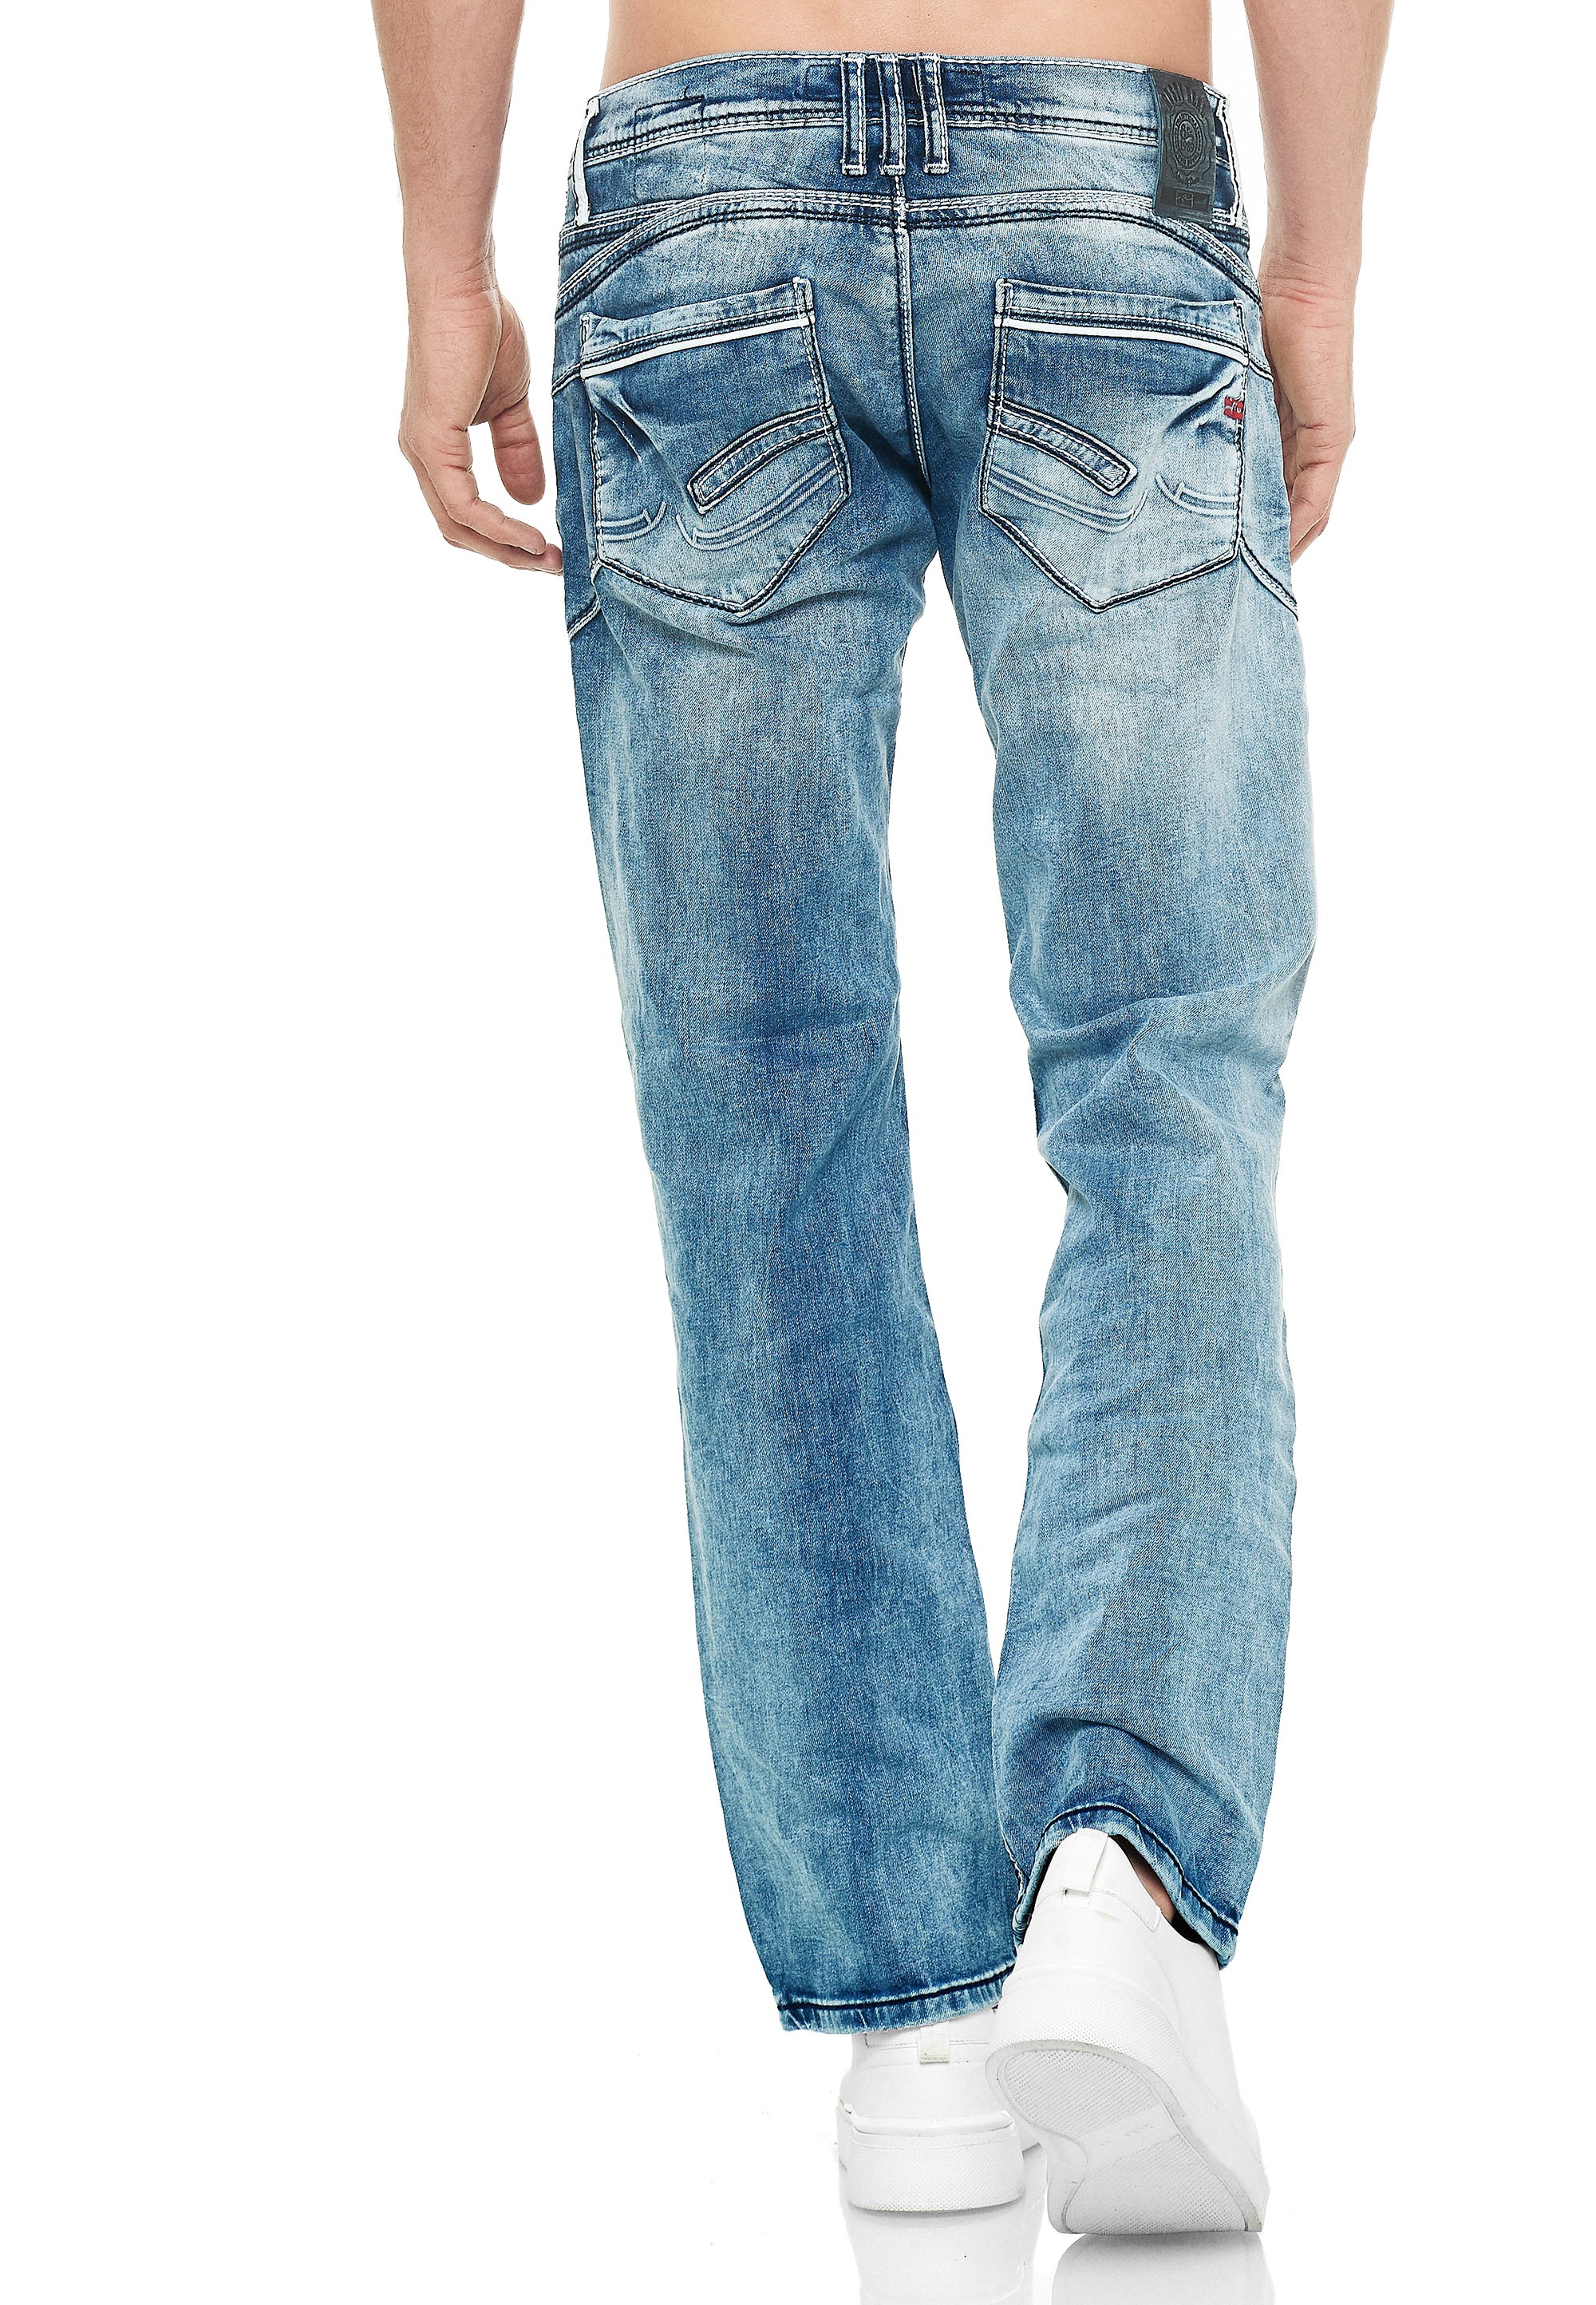 Rusty Neal Bequeme Jeans, mit cooler Waschung